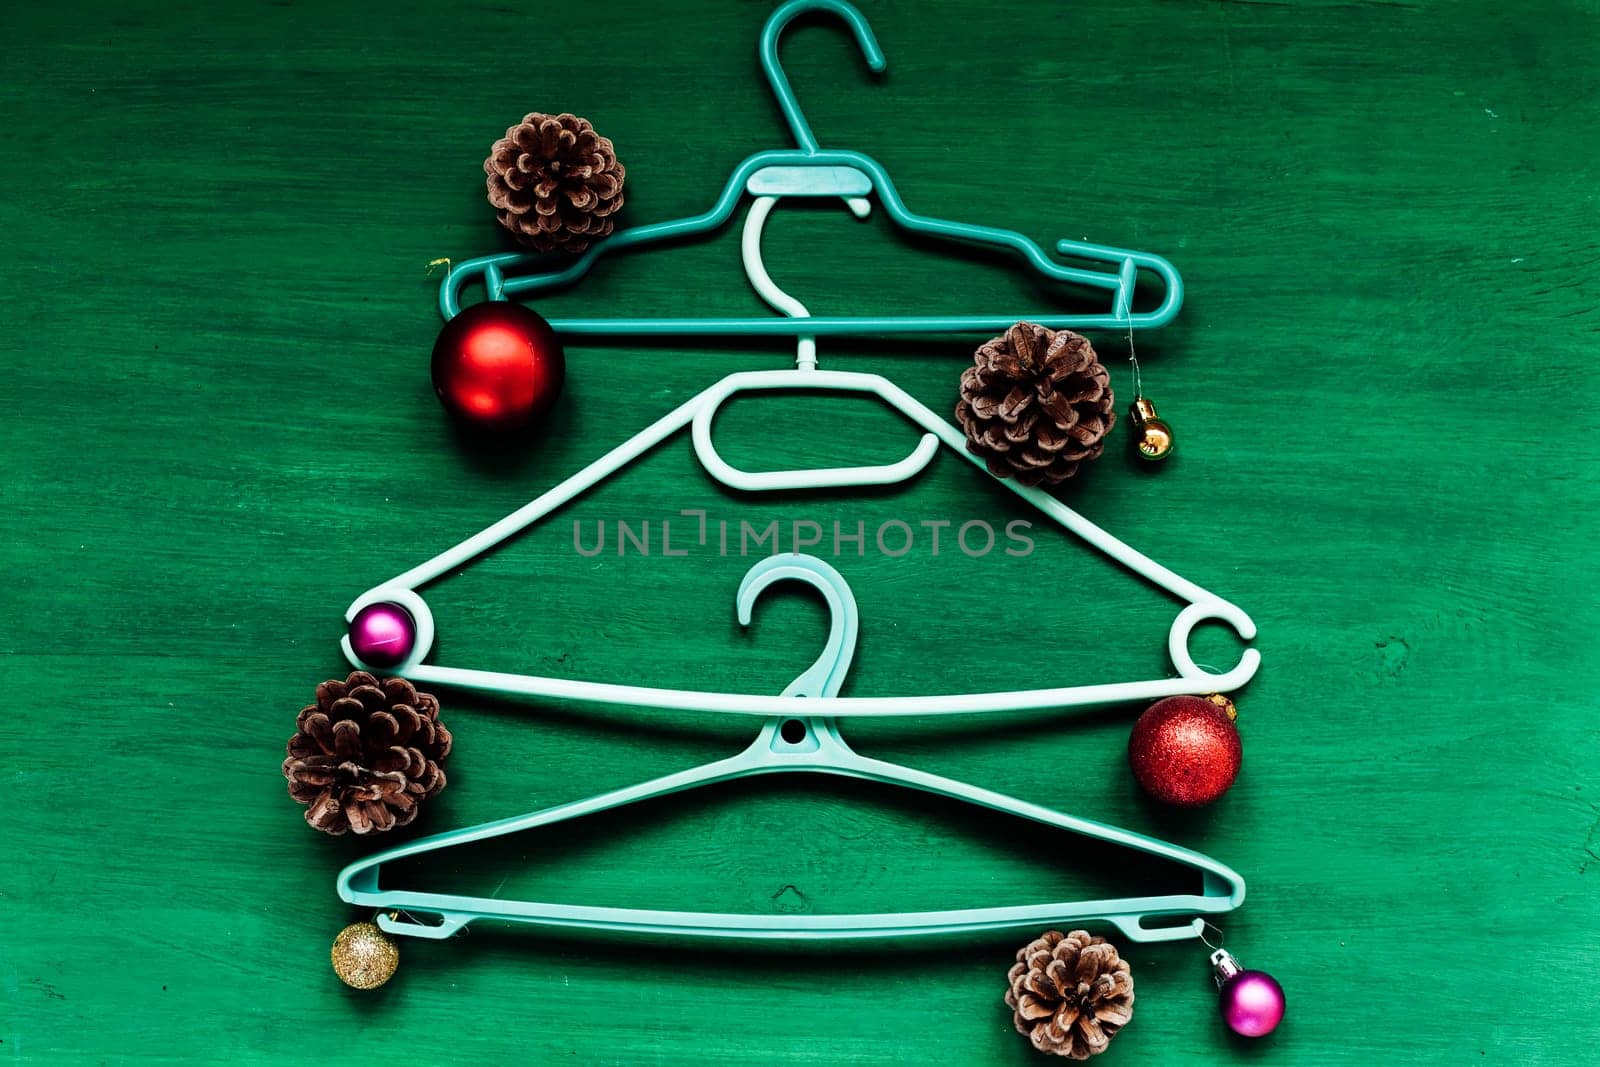 Hanger for clothes Christmas background Christmas tree gifts new year by Simakov